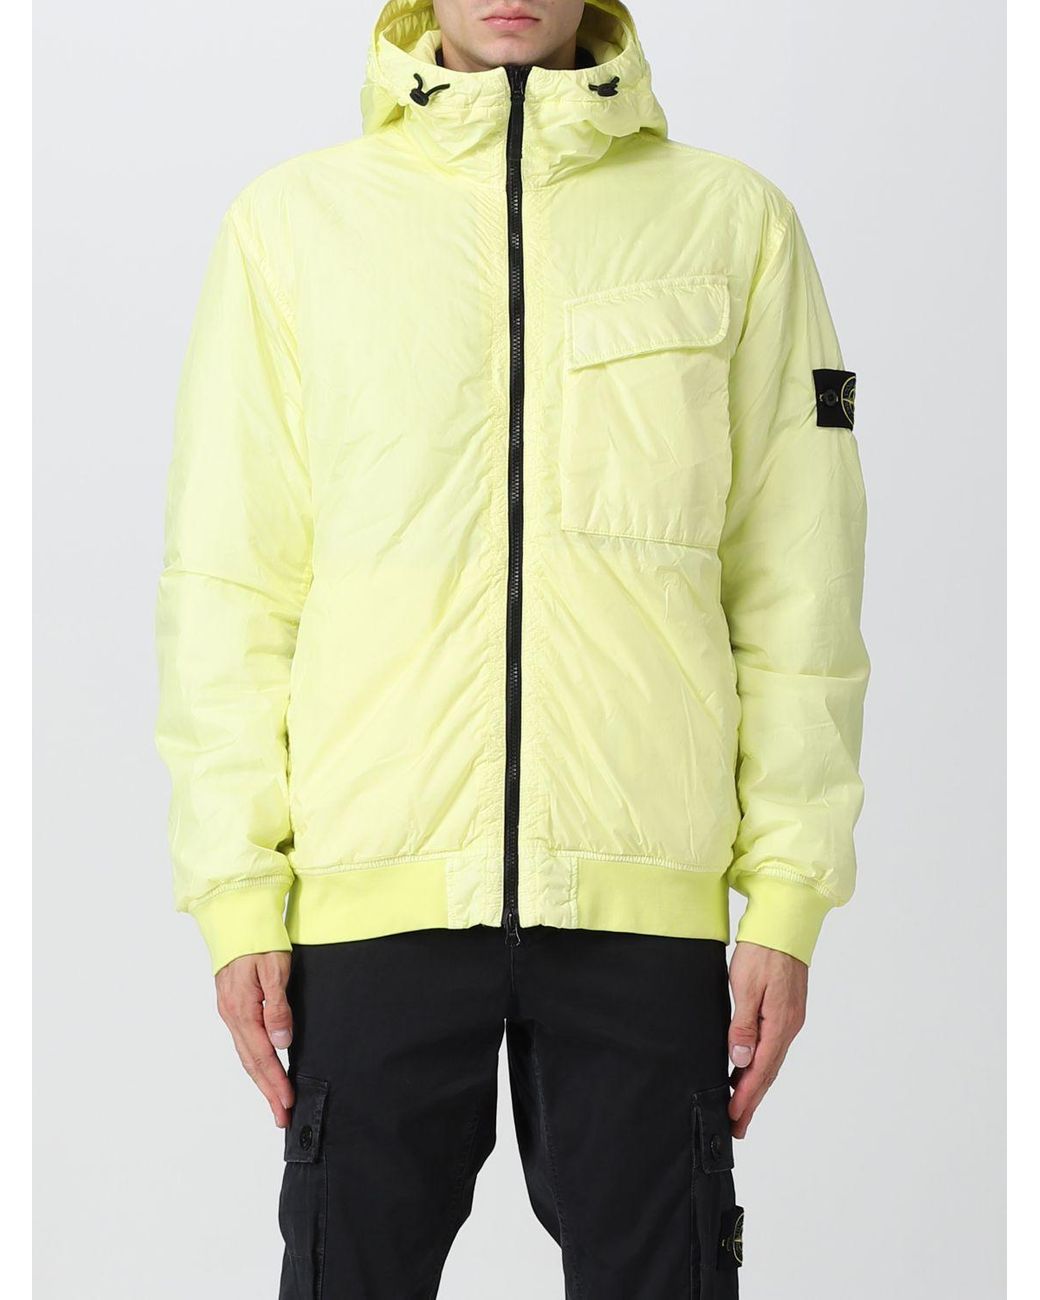 Stone Island Jacket in Yellow for Men | Lyst